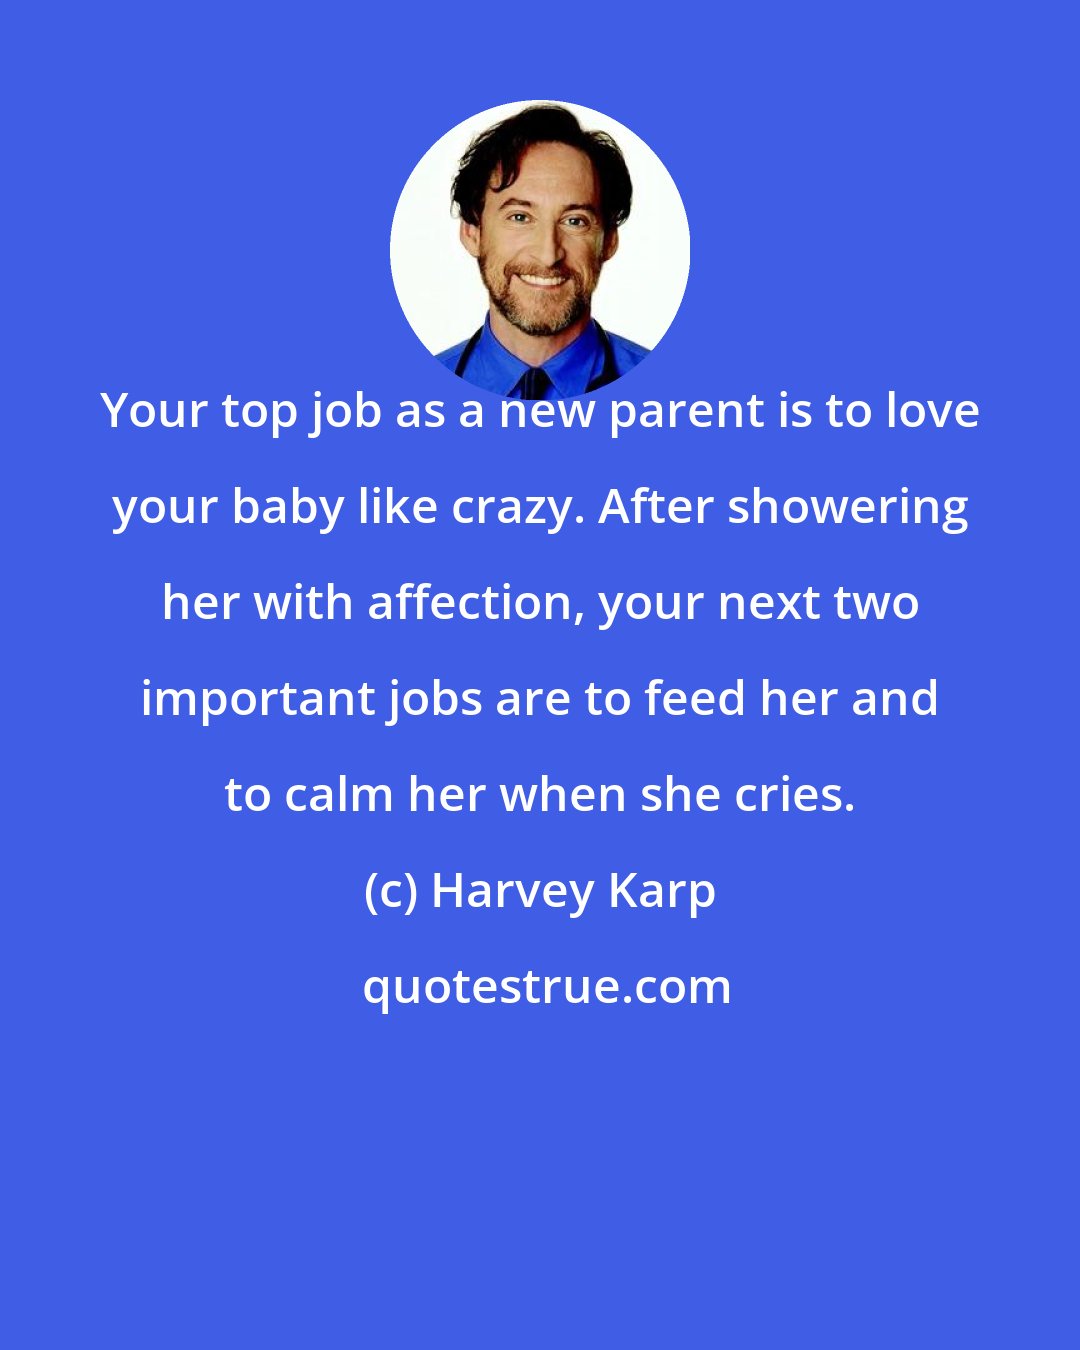 Harvey Karp: Your top job as a new parent is to love your baby like crazy. After showering her with affection, your next two important jobs are to feed her and to calm her when she cries.